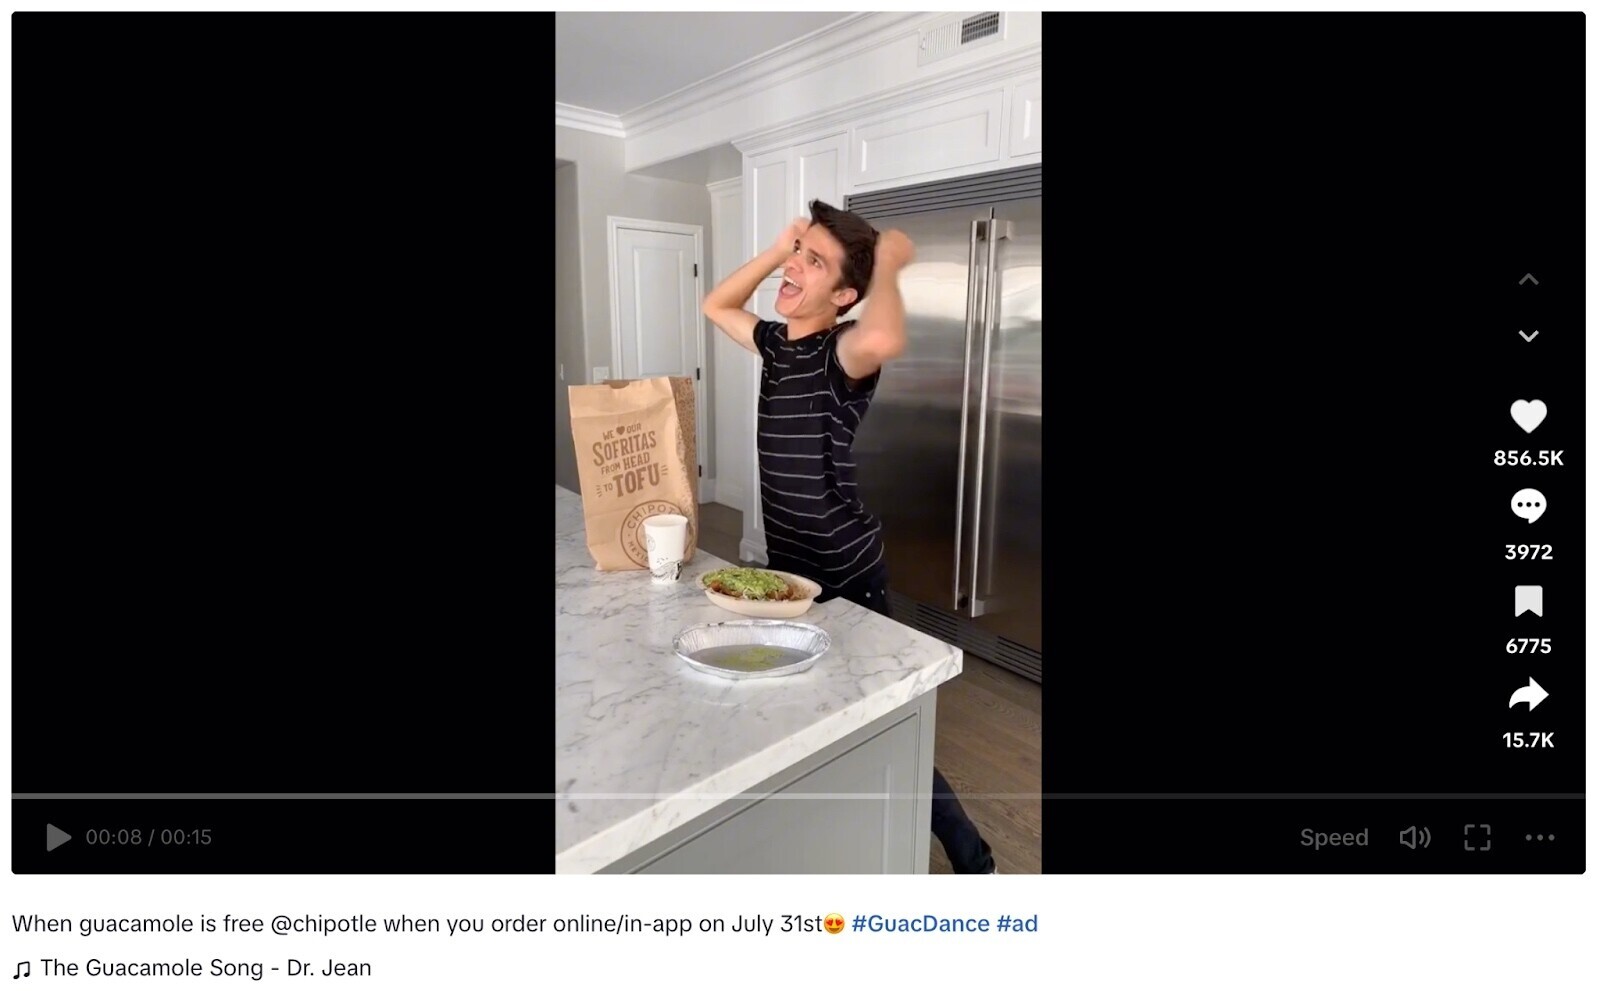 Chipotle’s #GuacDance challenge